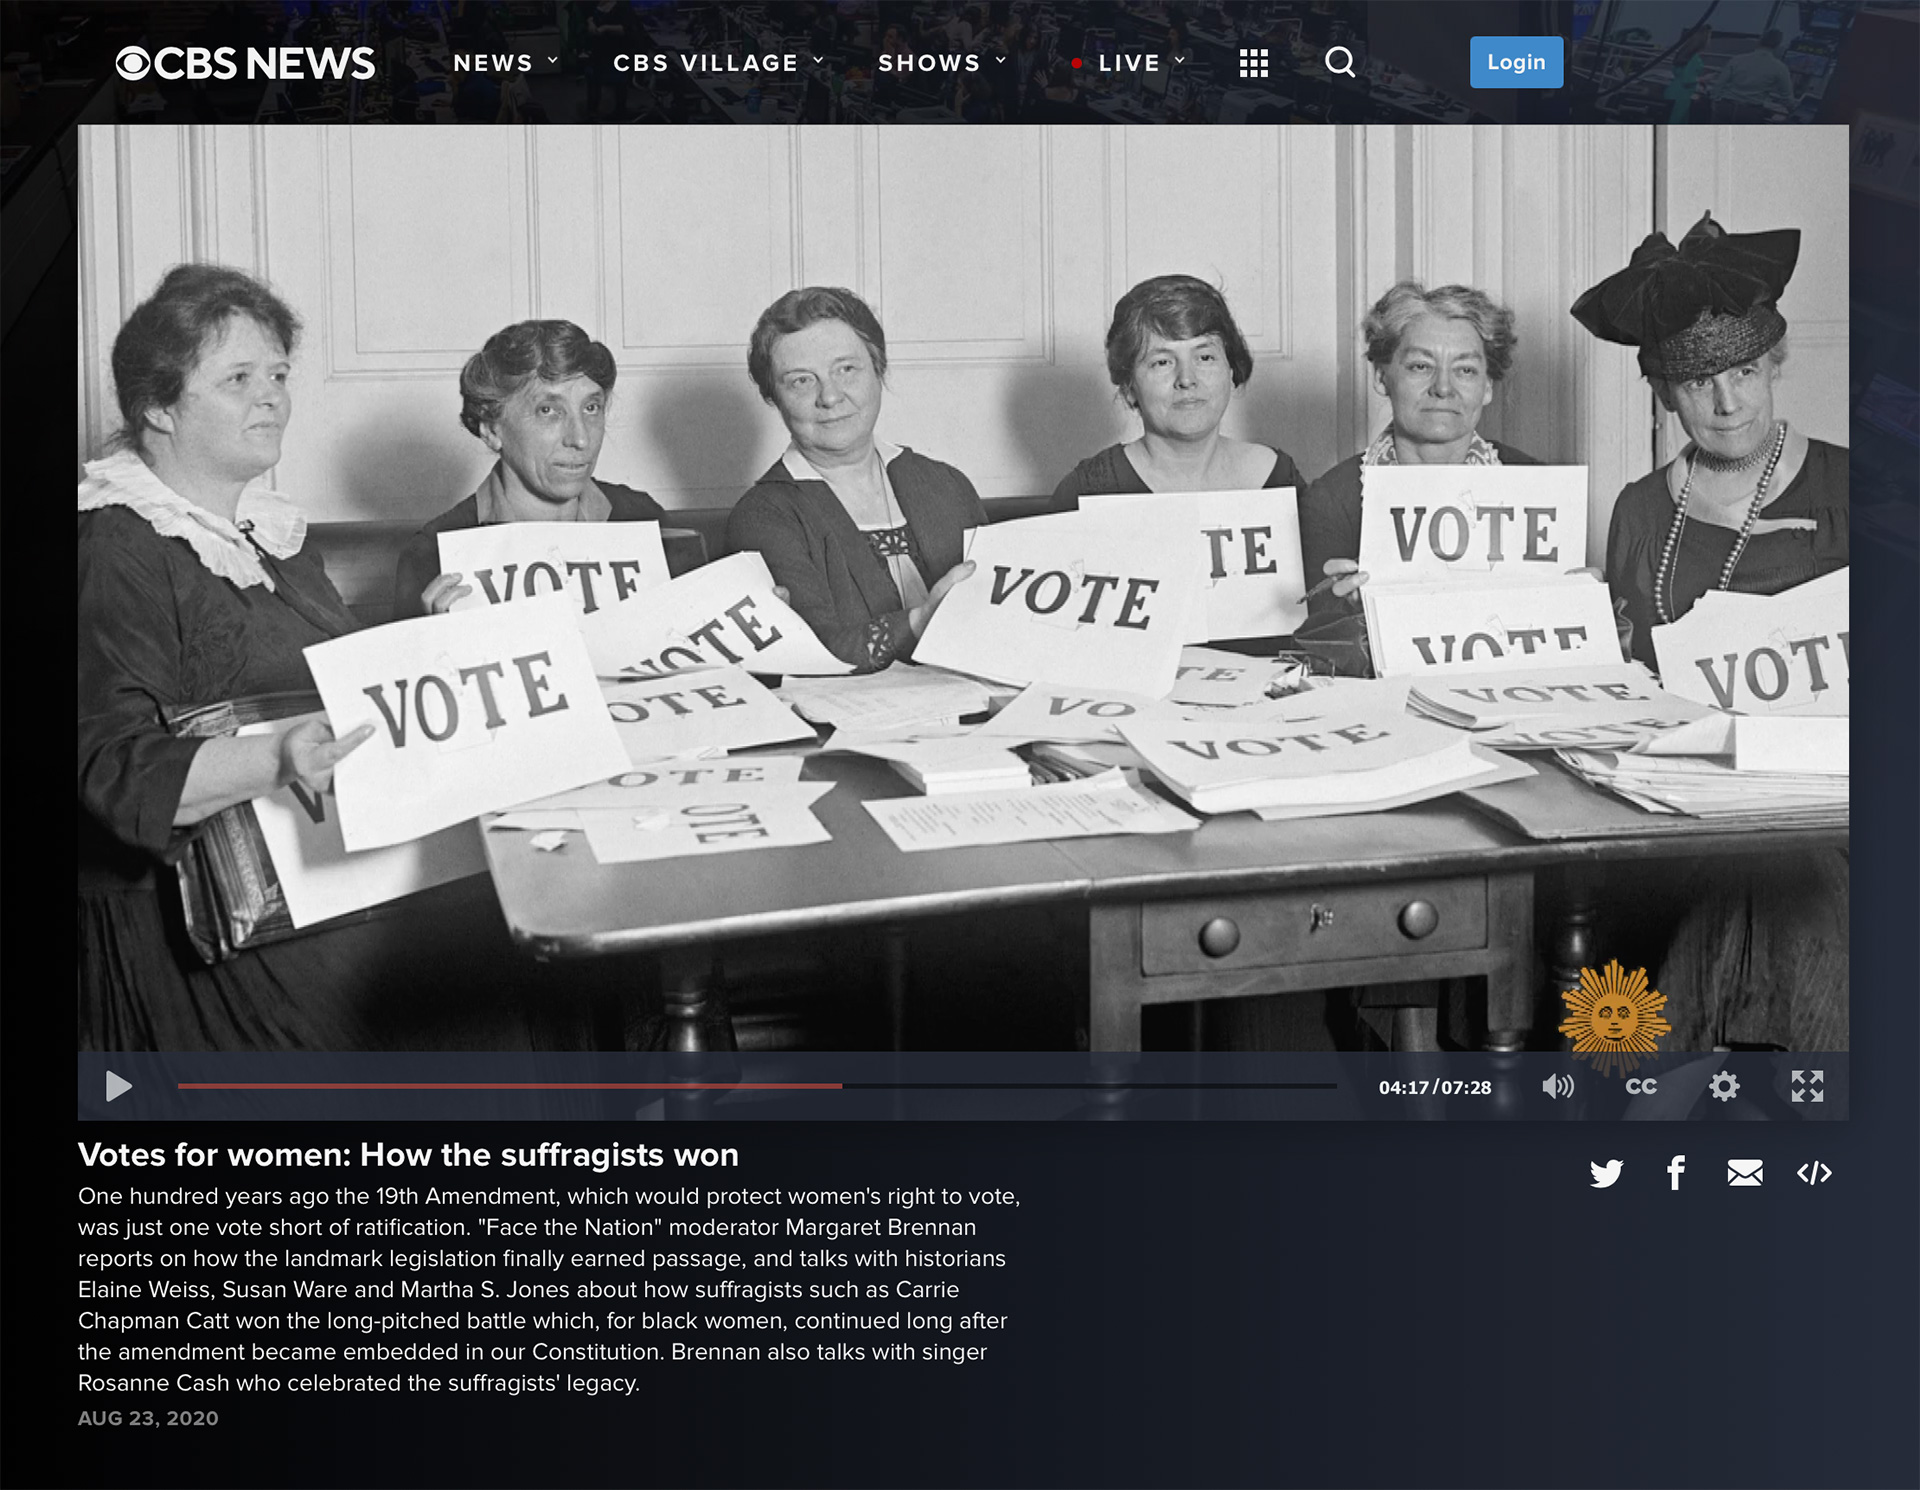 CBS News – Votes for Women: How the Suffragists Won hero image.